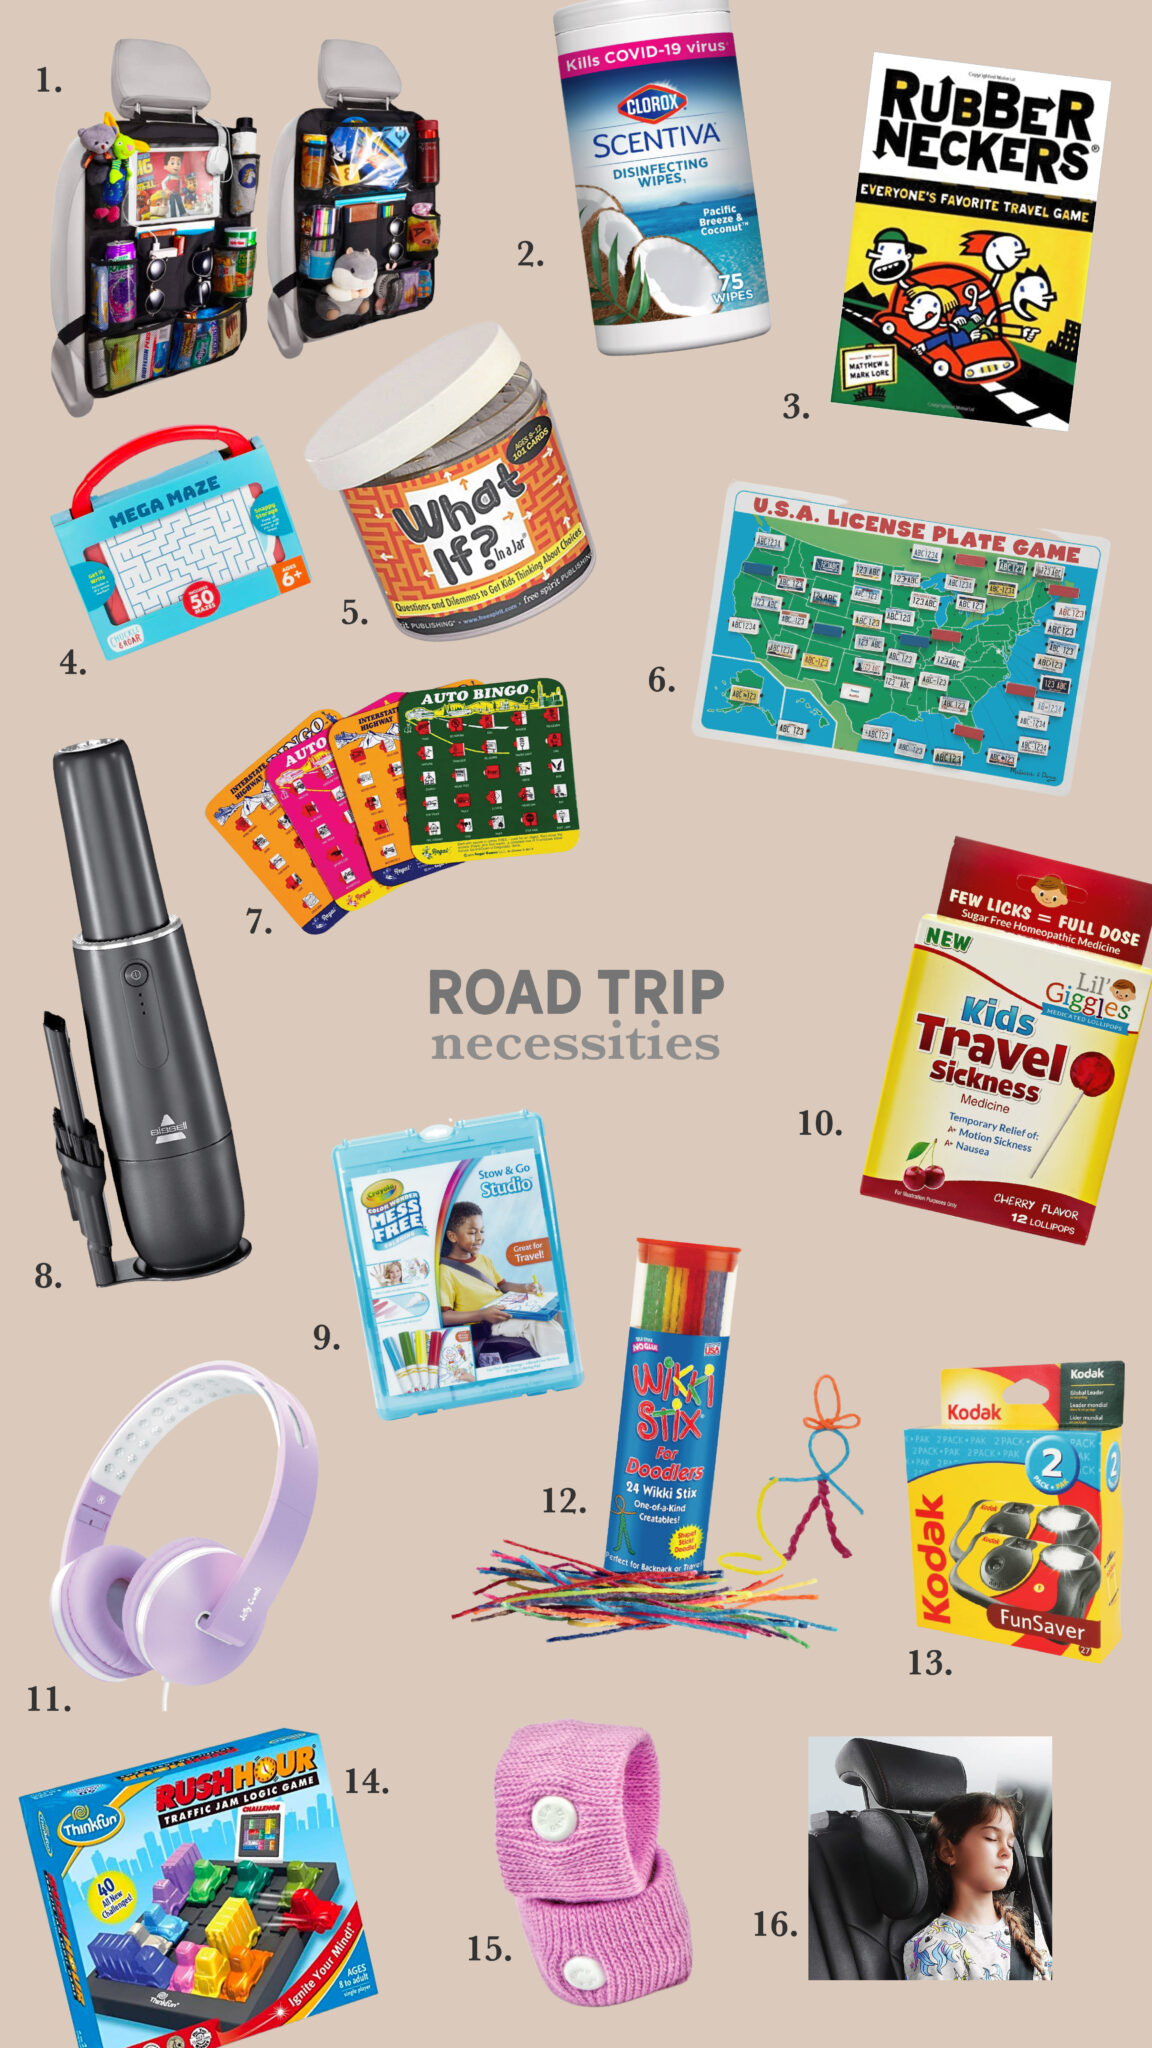 The Best Tips for Road Trips with Kids! - Chris Loves Julia